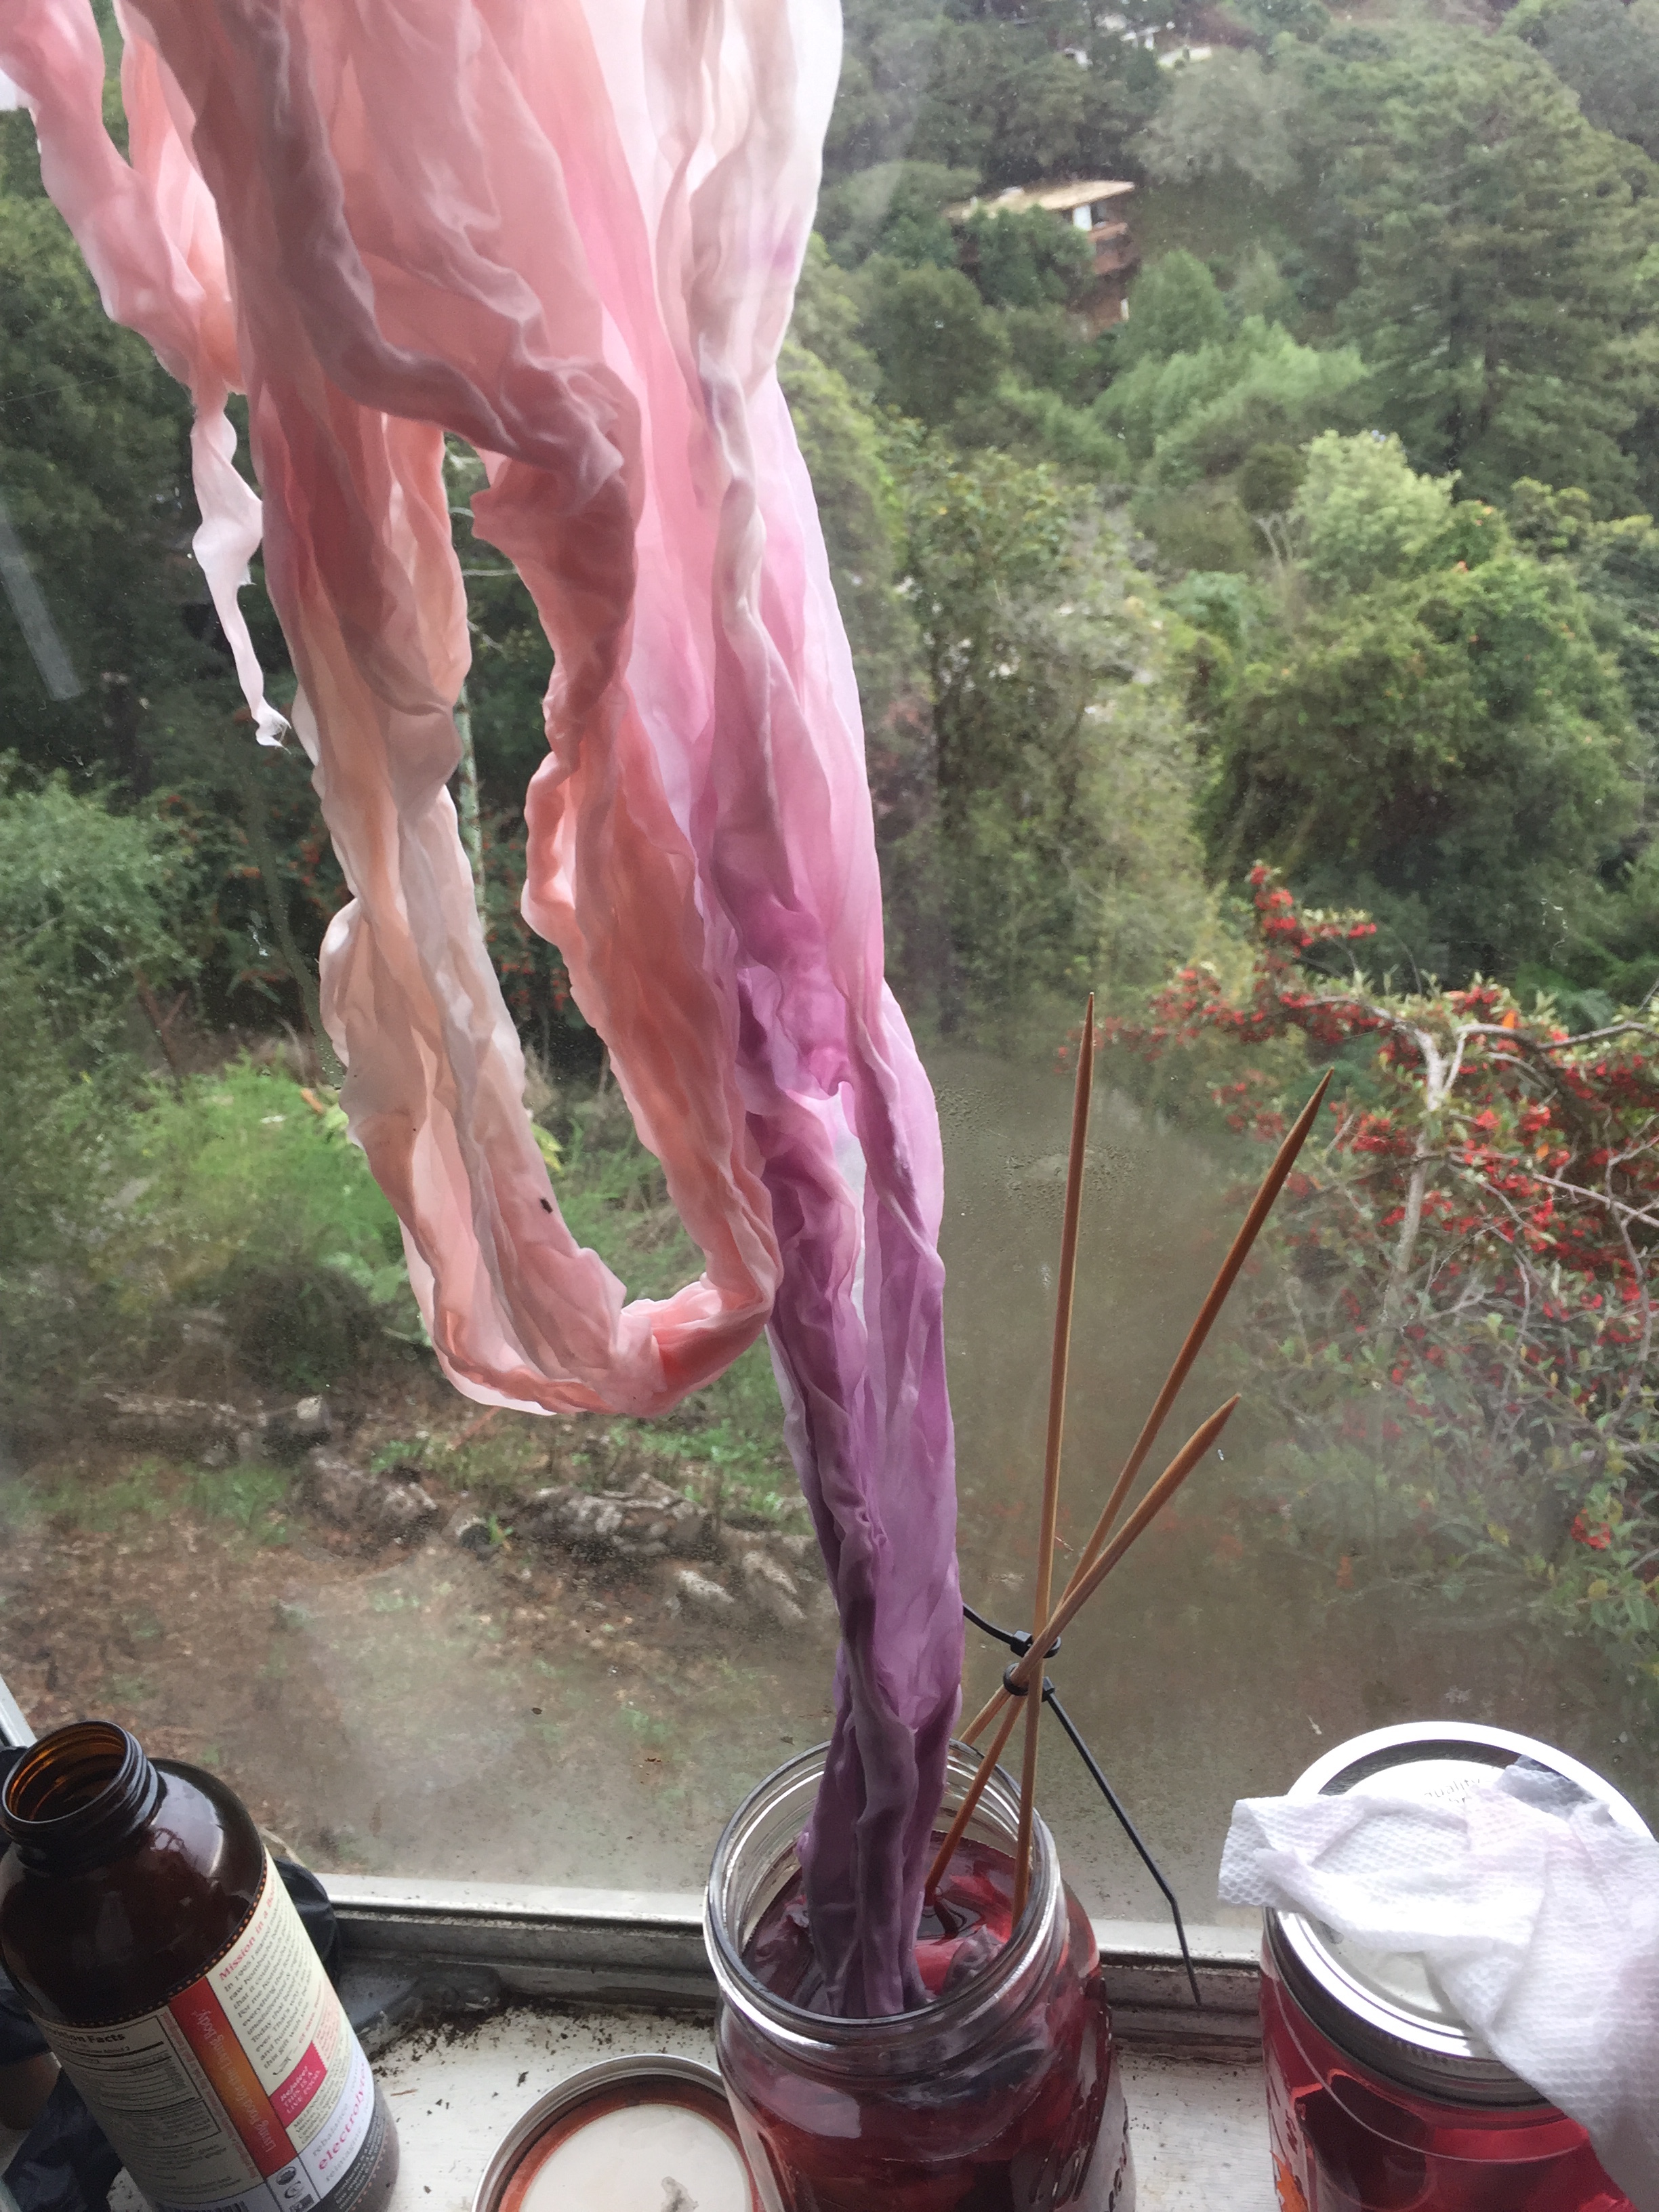 Red onion wicking up silk.